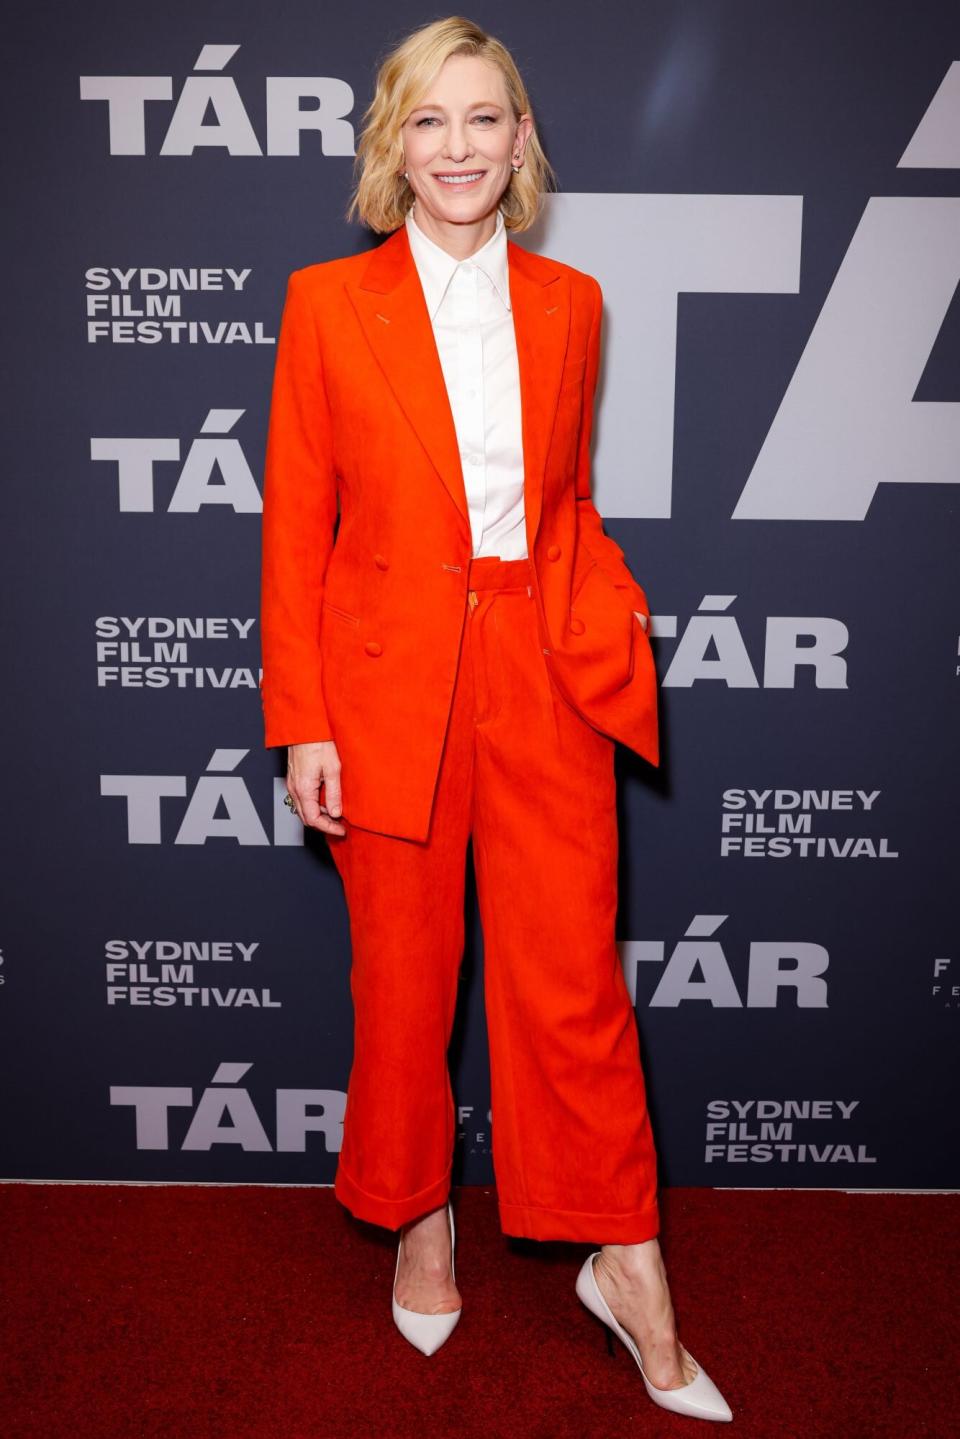 SYDNEY, AUSTRALIA - NOVE MBER 13: Cate Blanchett poses at a special screening for TÁR at Cremorne Orpheum on November 13, 2022 in Sydney, Australia. (Photo by Hanna Lassen/Getty Images)